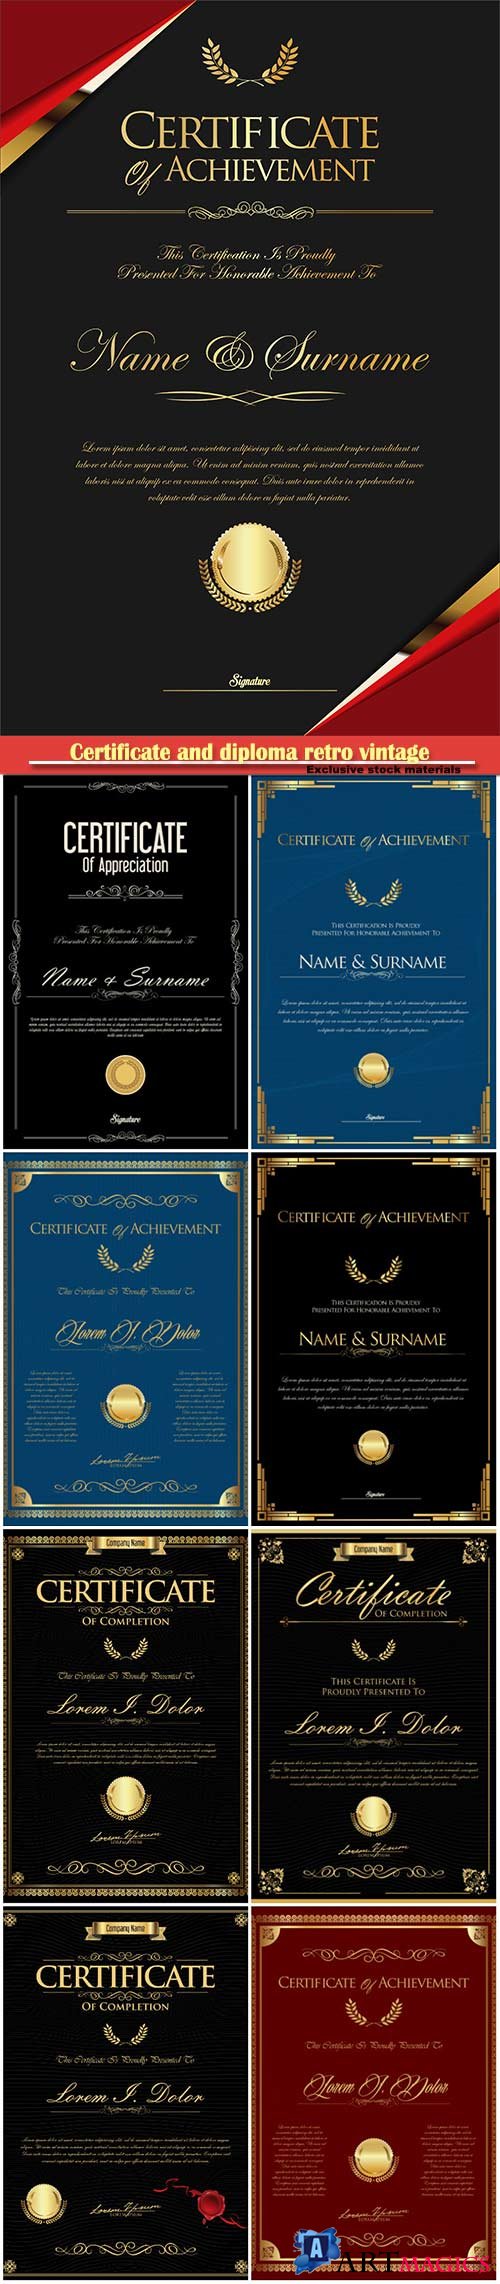 Certificate and diploma retro vintage vector template